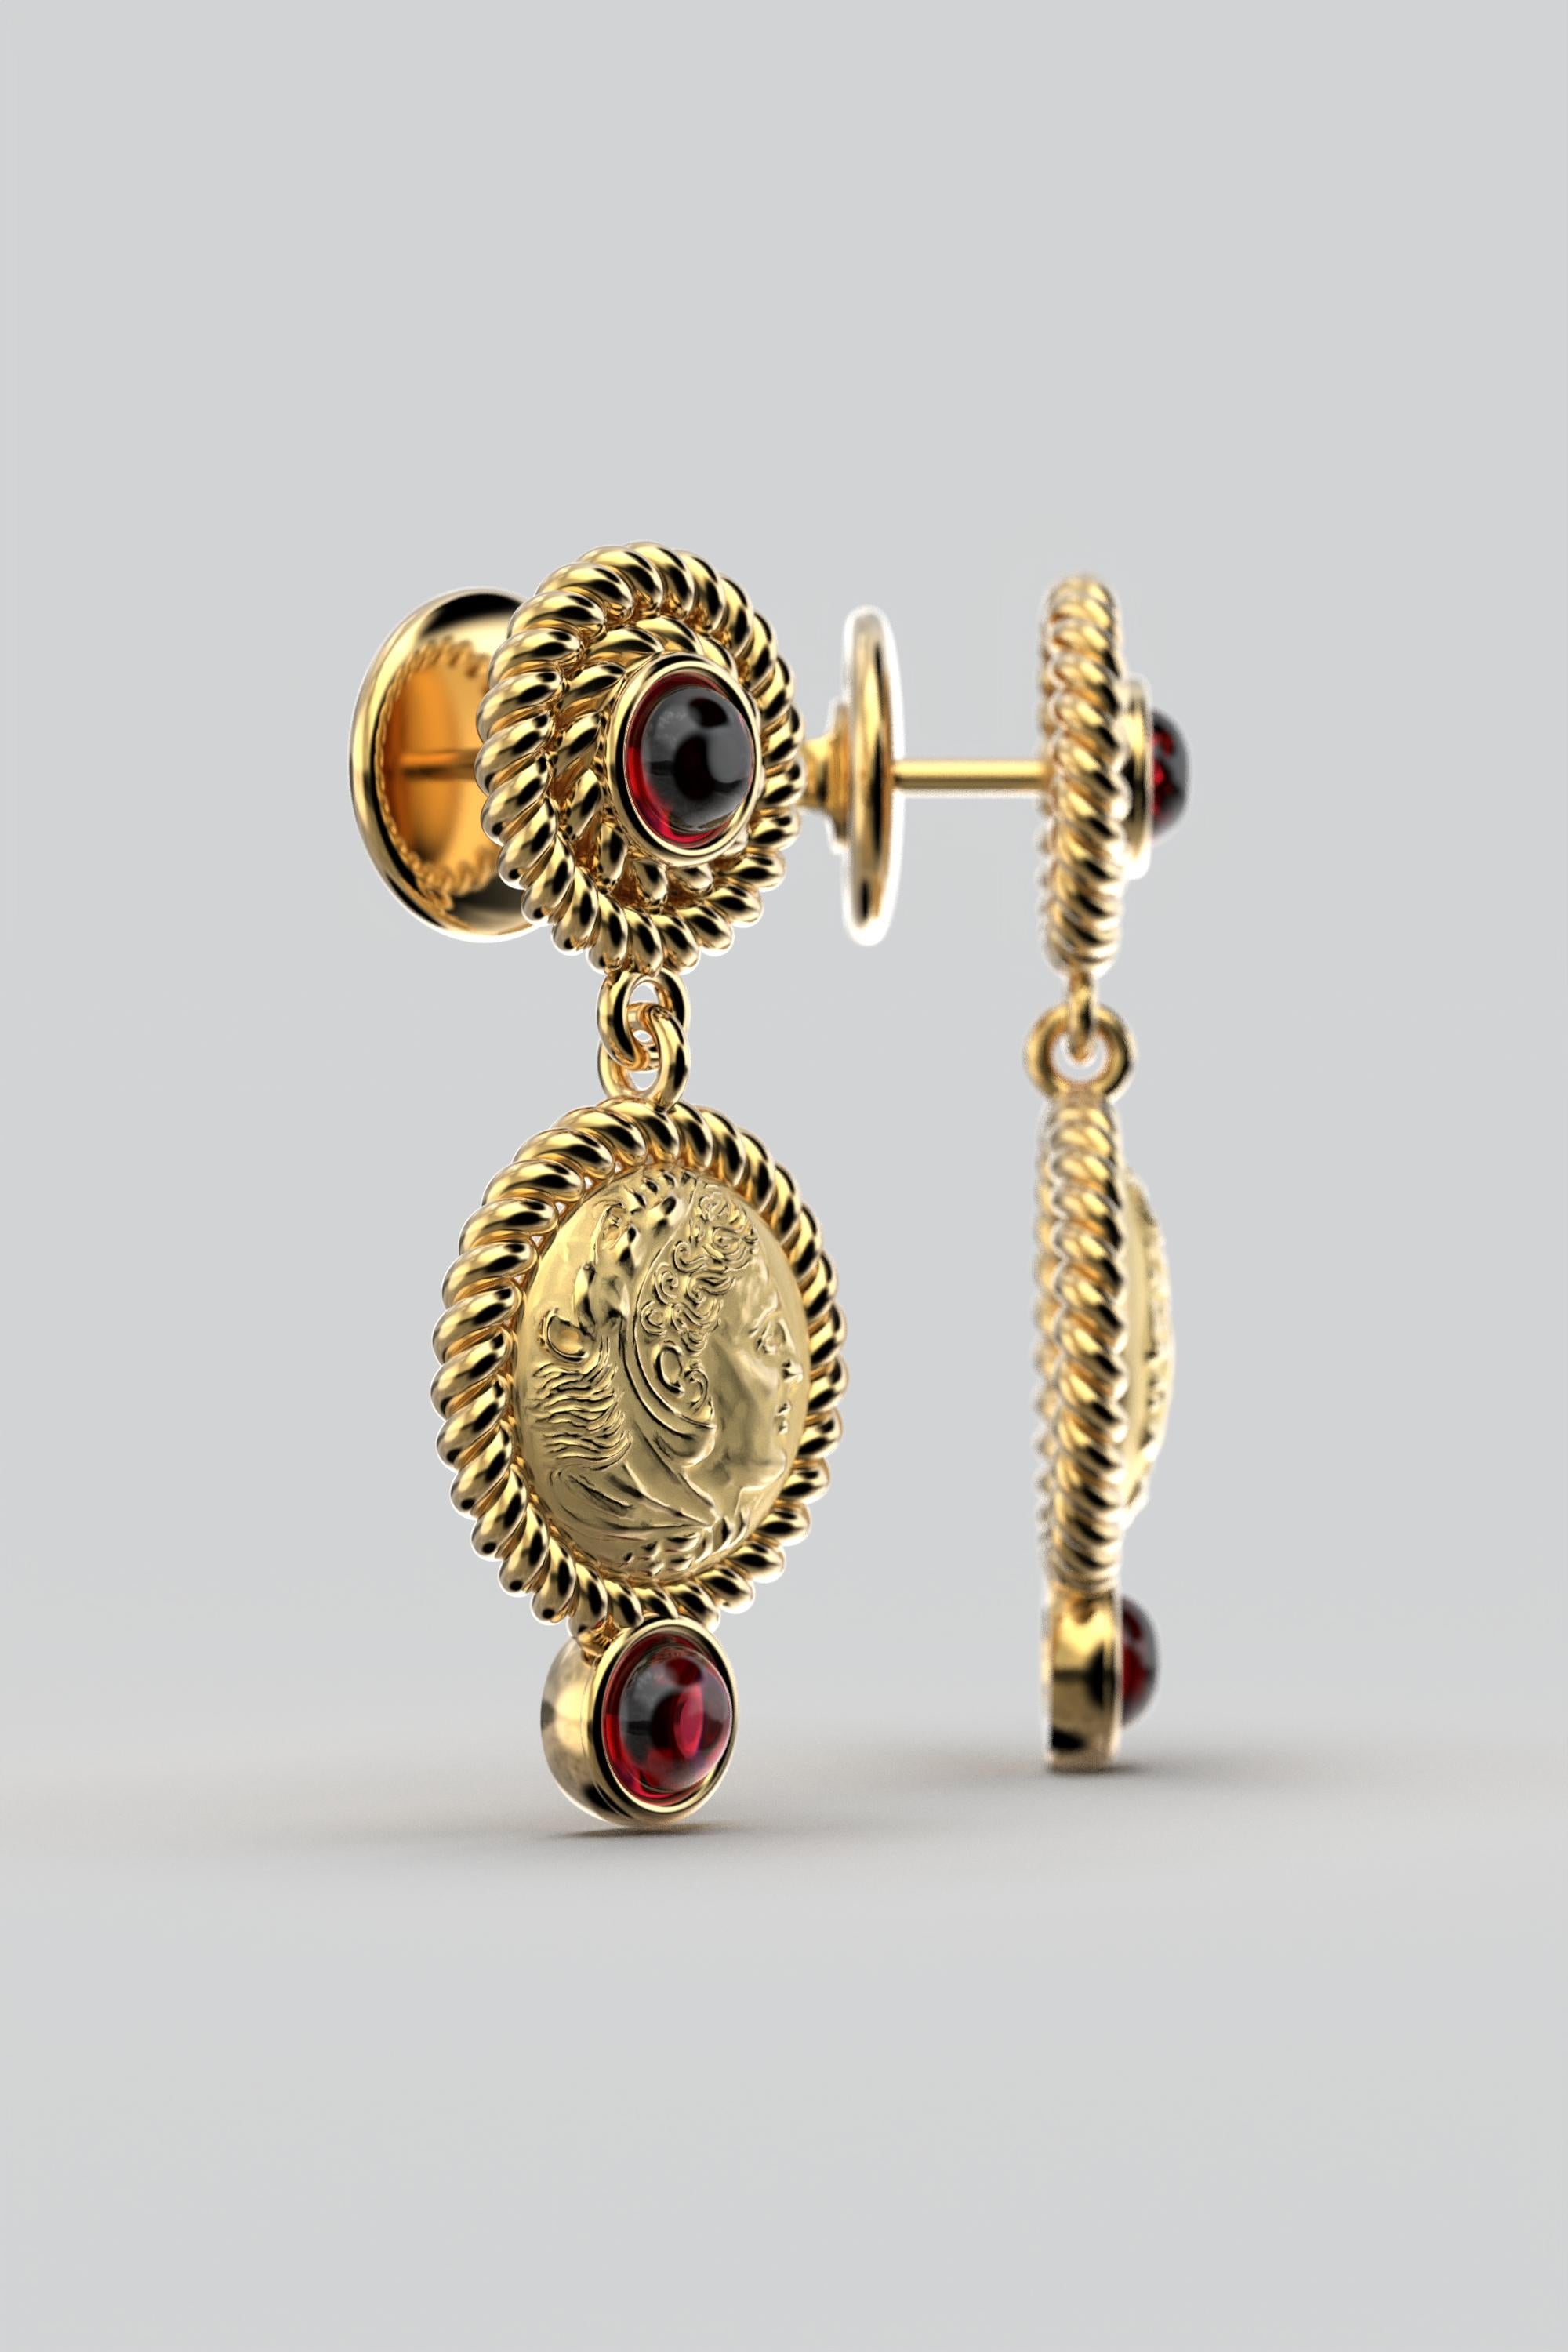 Made to order in 14k Gold and Natural Garnets.
Discover our exquisite Made in Italy Dangle Earrings, crafted with meticulous artistry in either 14k or 18k gold and adorned with stunning natural Garnet cabochons ( 4 mm). Inspired by the grandeur of